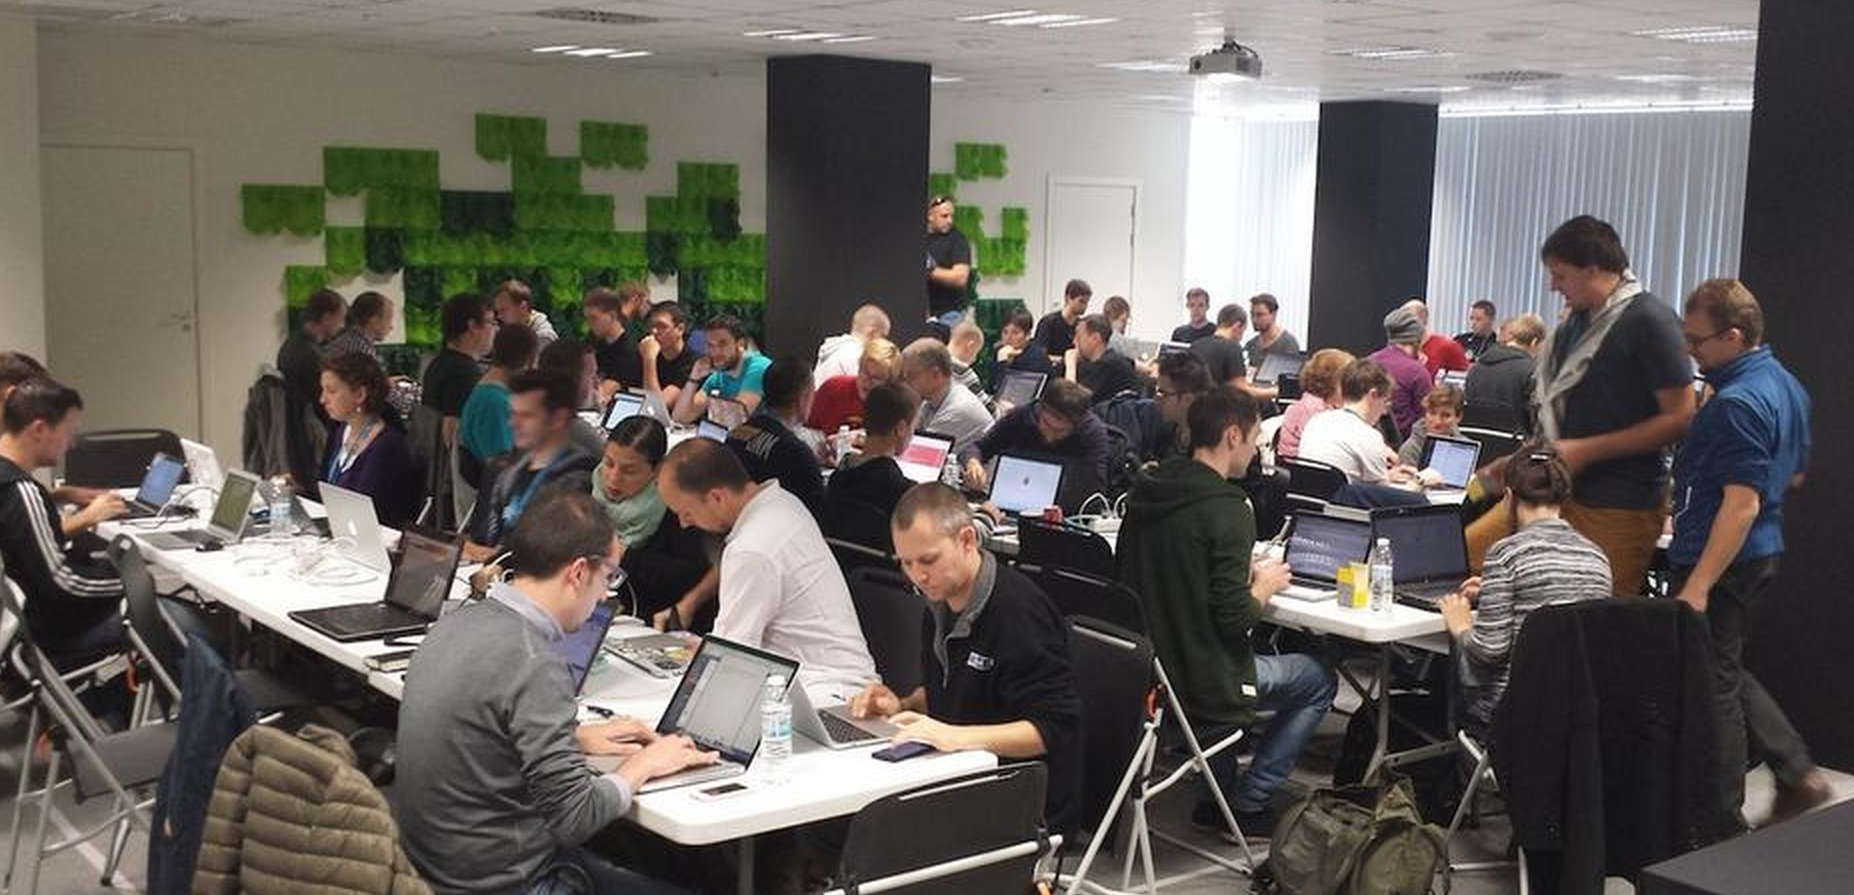 WordPress Theme Review Team Gains 27 New Reviewers at WordCamp Europe Contributor Day